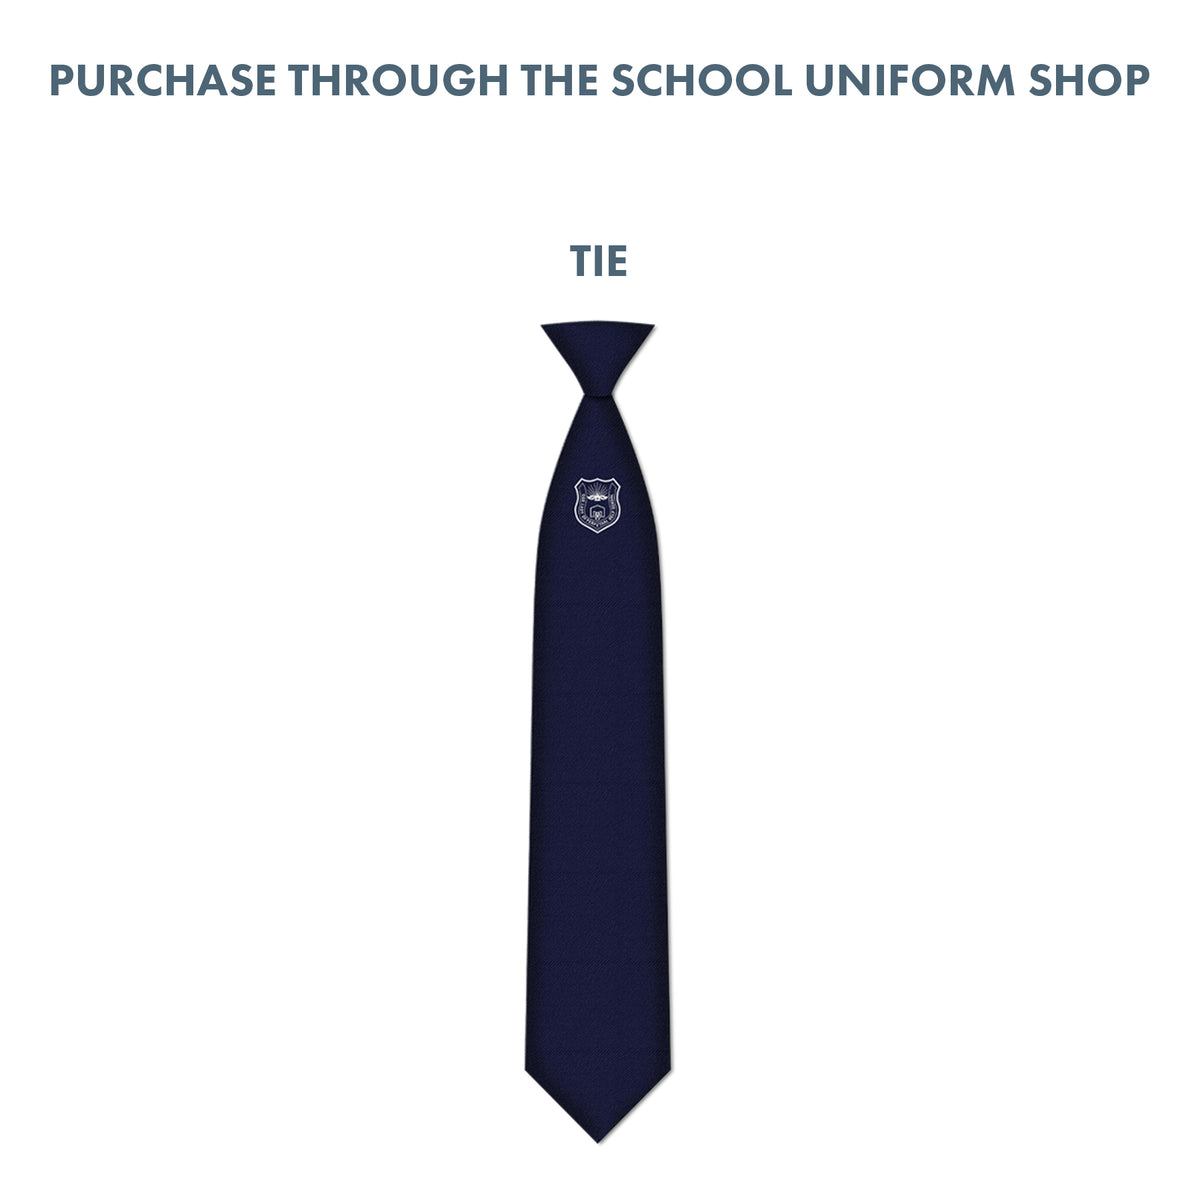 PURCHASE THROUGH THE SCHOOL